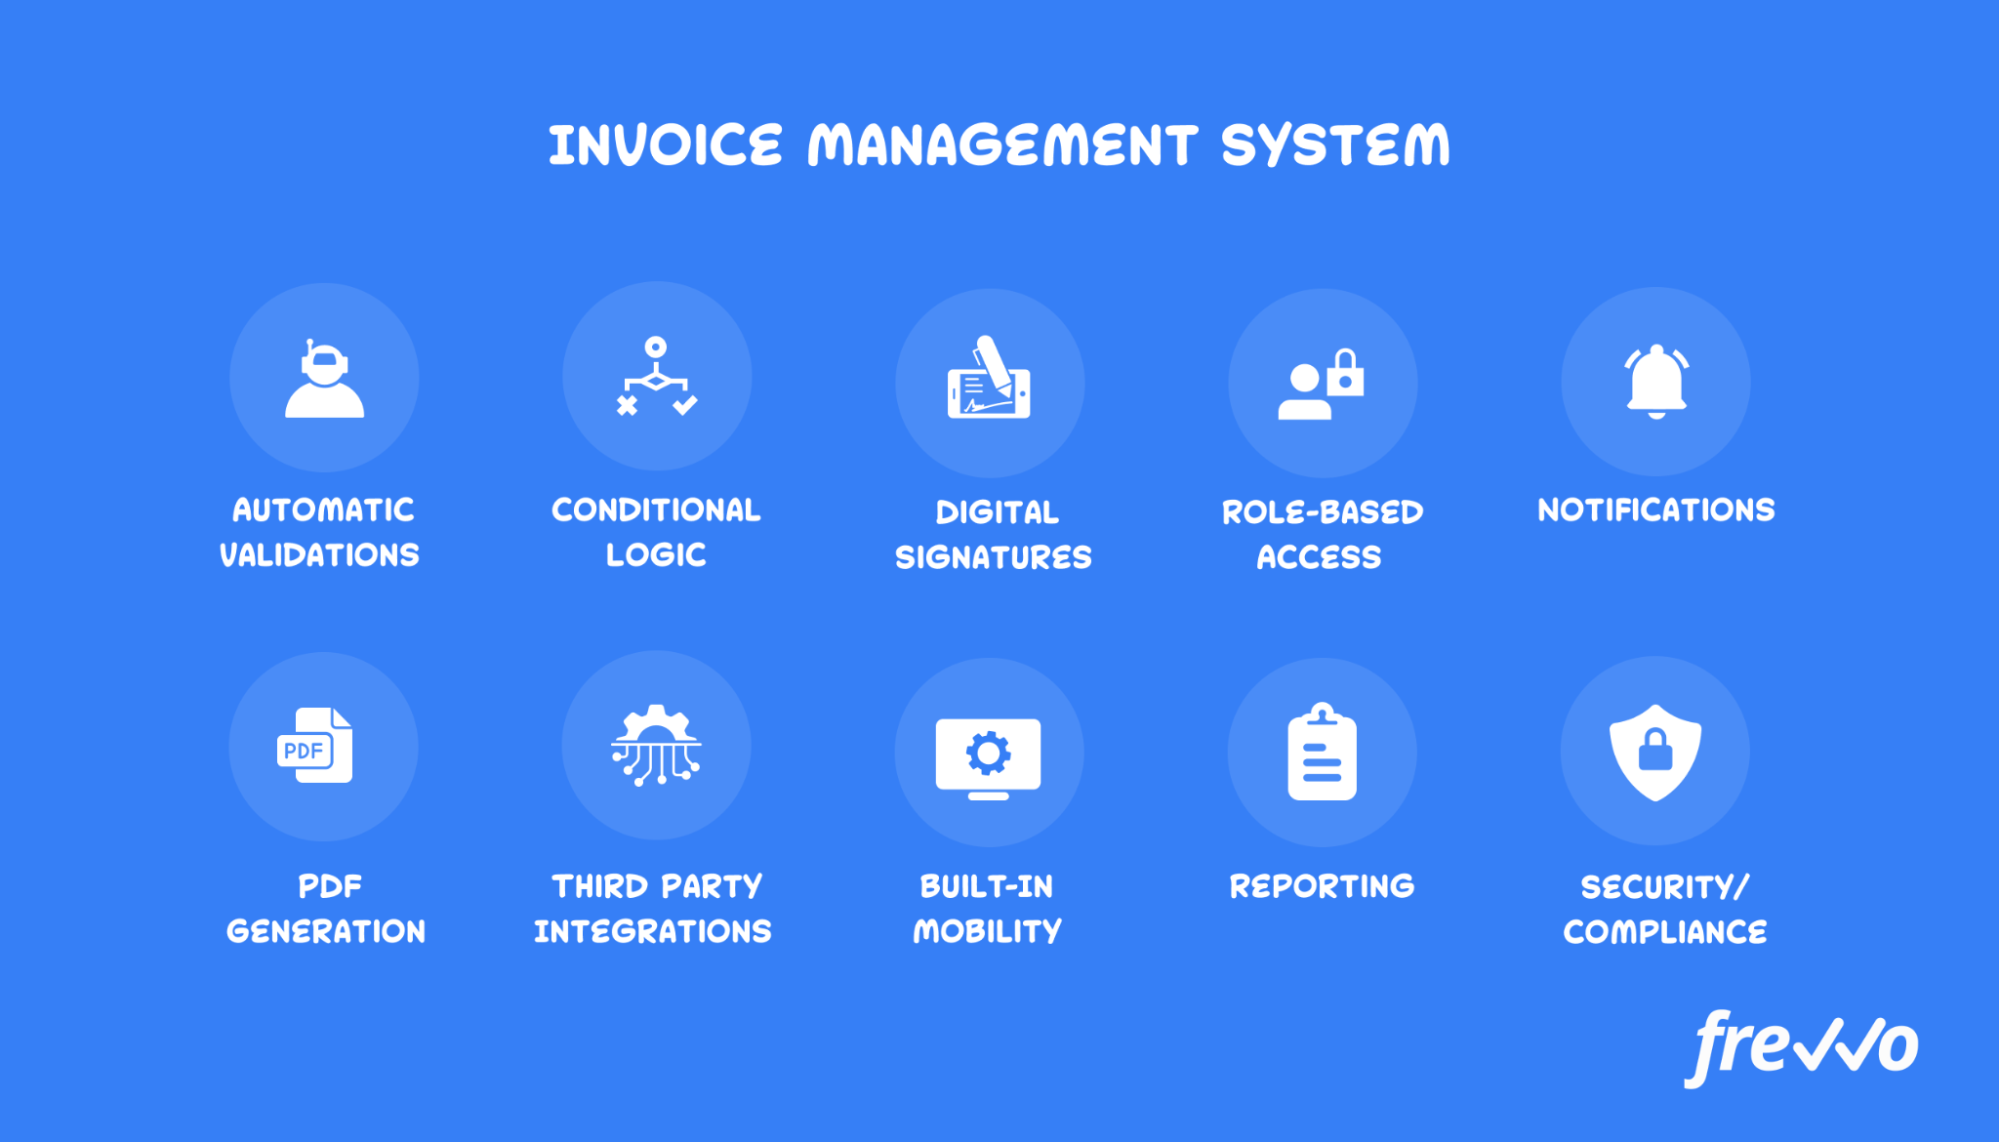 How to choose an invoice management system